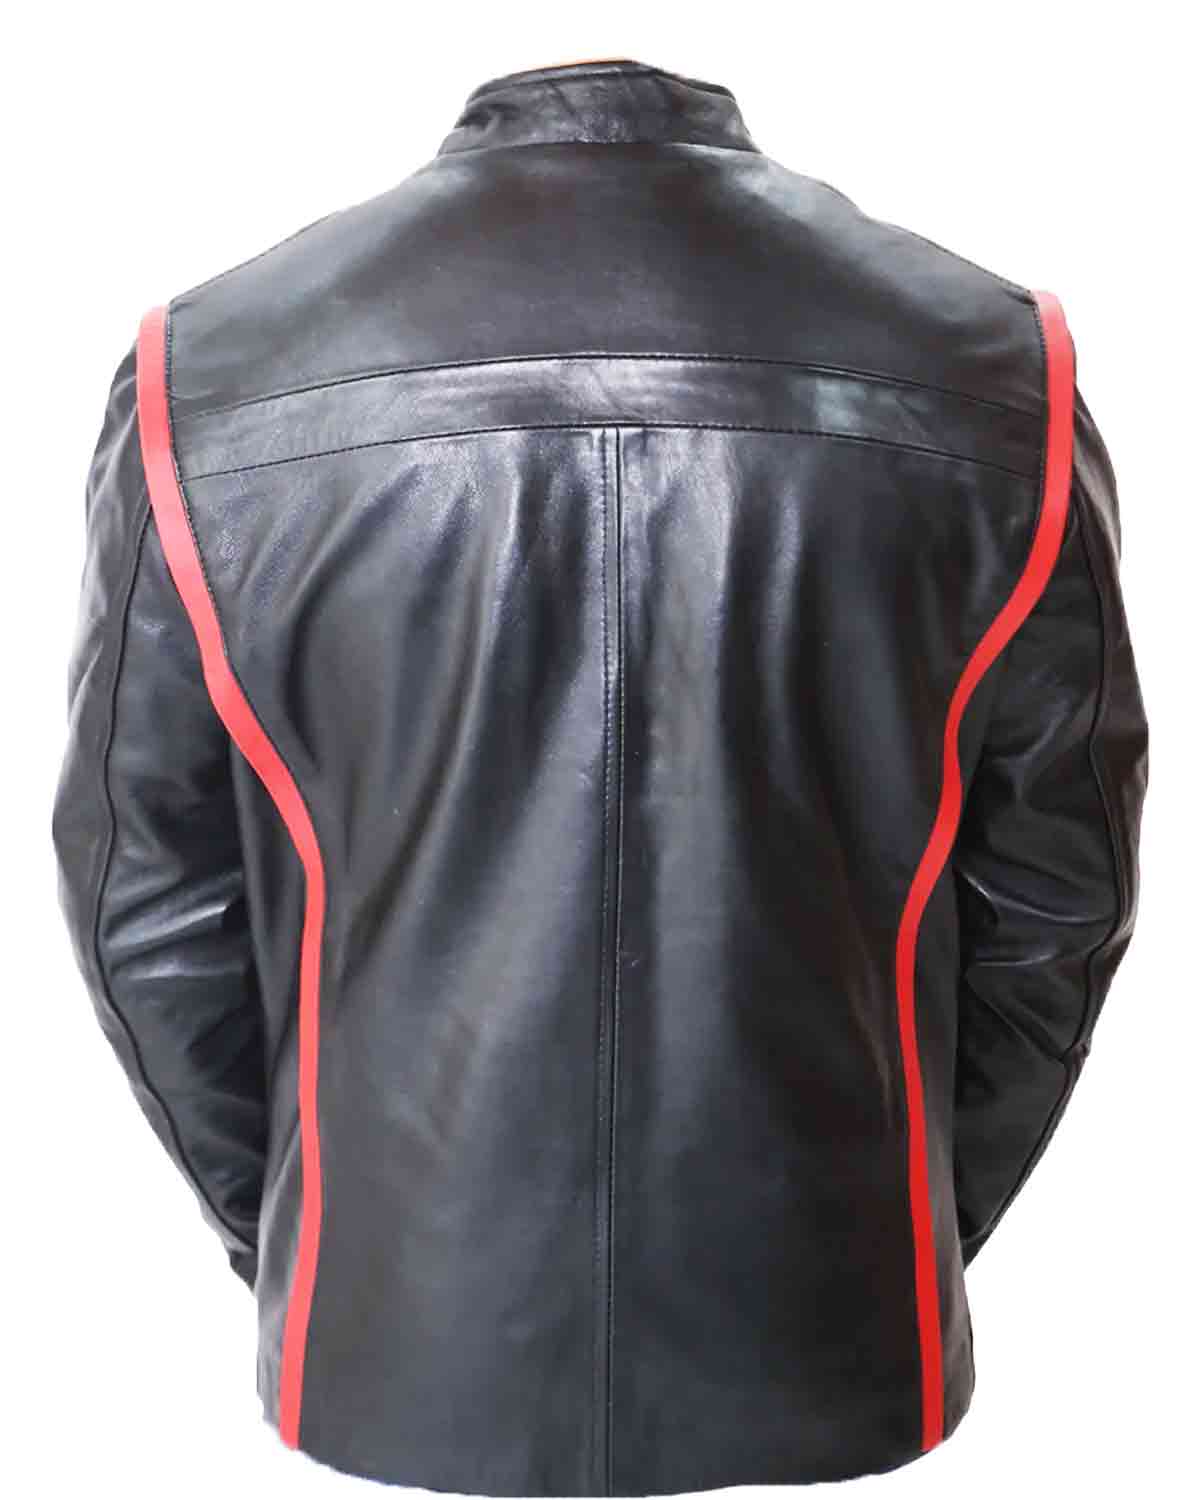 Elite N7 Mass Effect 3 Game Real Leather Jacket